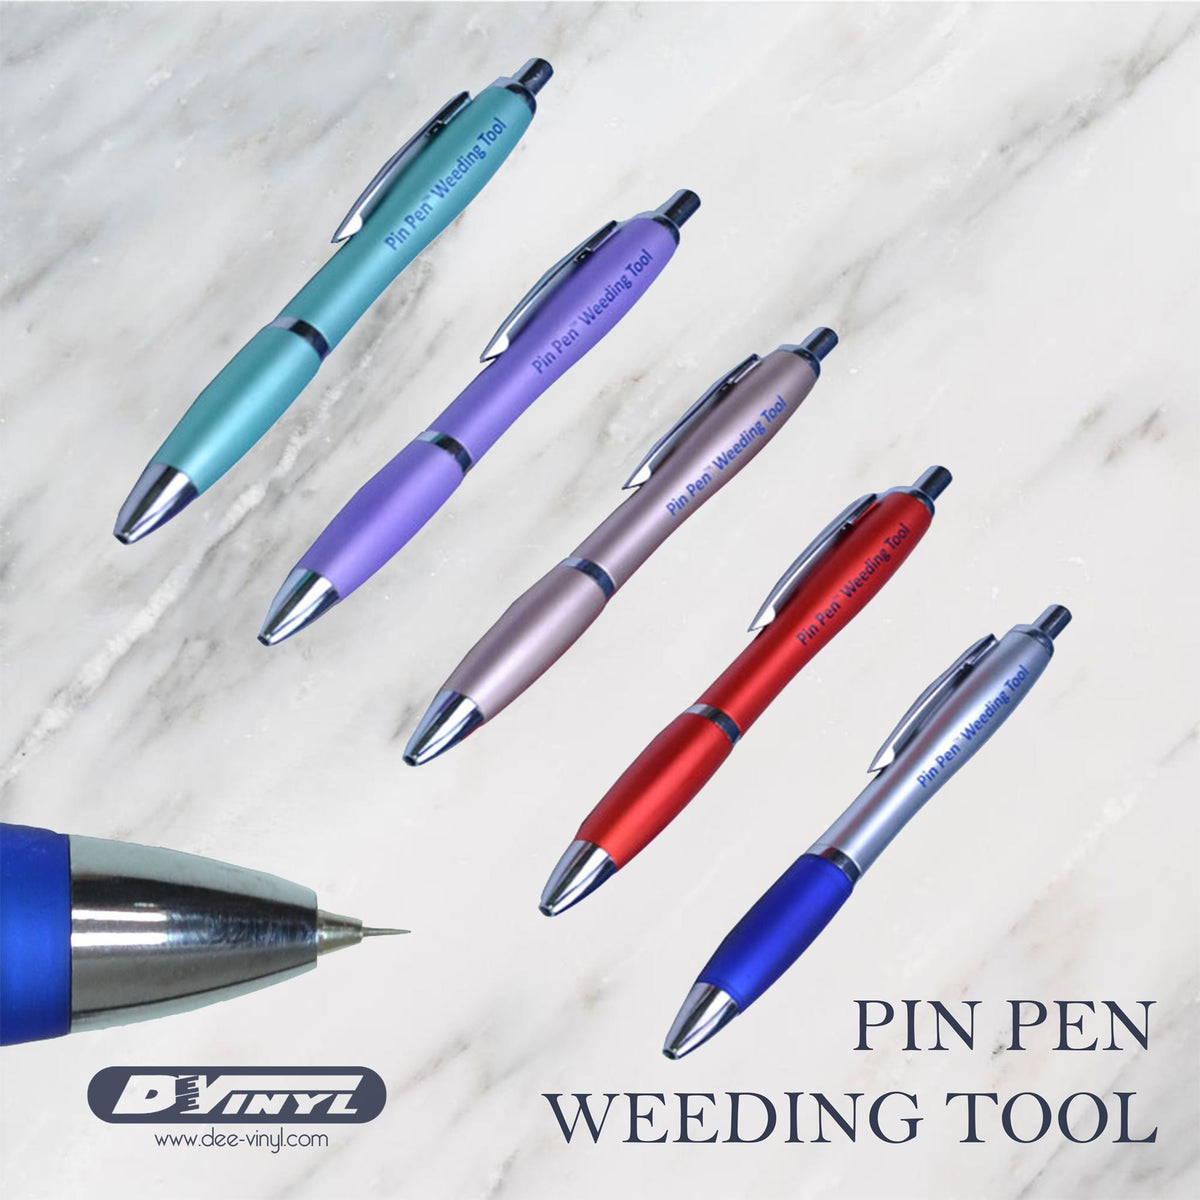 Pin Pen Weeding Tools - Air Release Vinyl Pinpen, 4Pcs Craft Retractable  Squeegee Out Sticker Bubble Weeding Point Pen with 2 Replacement Pen  Refills